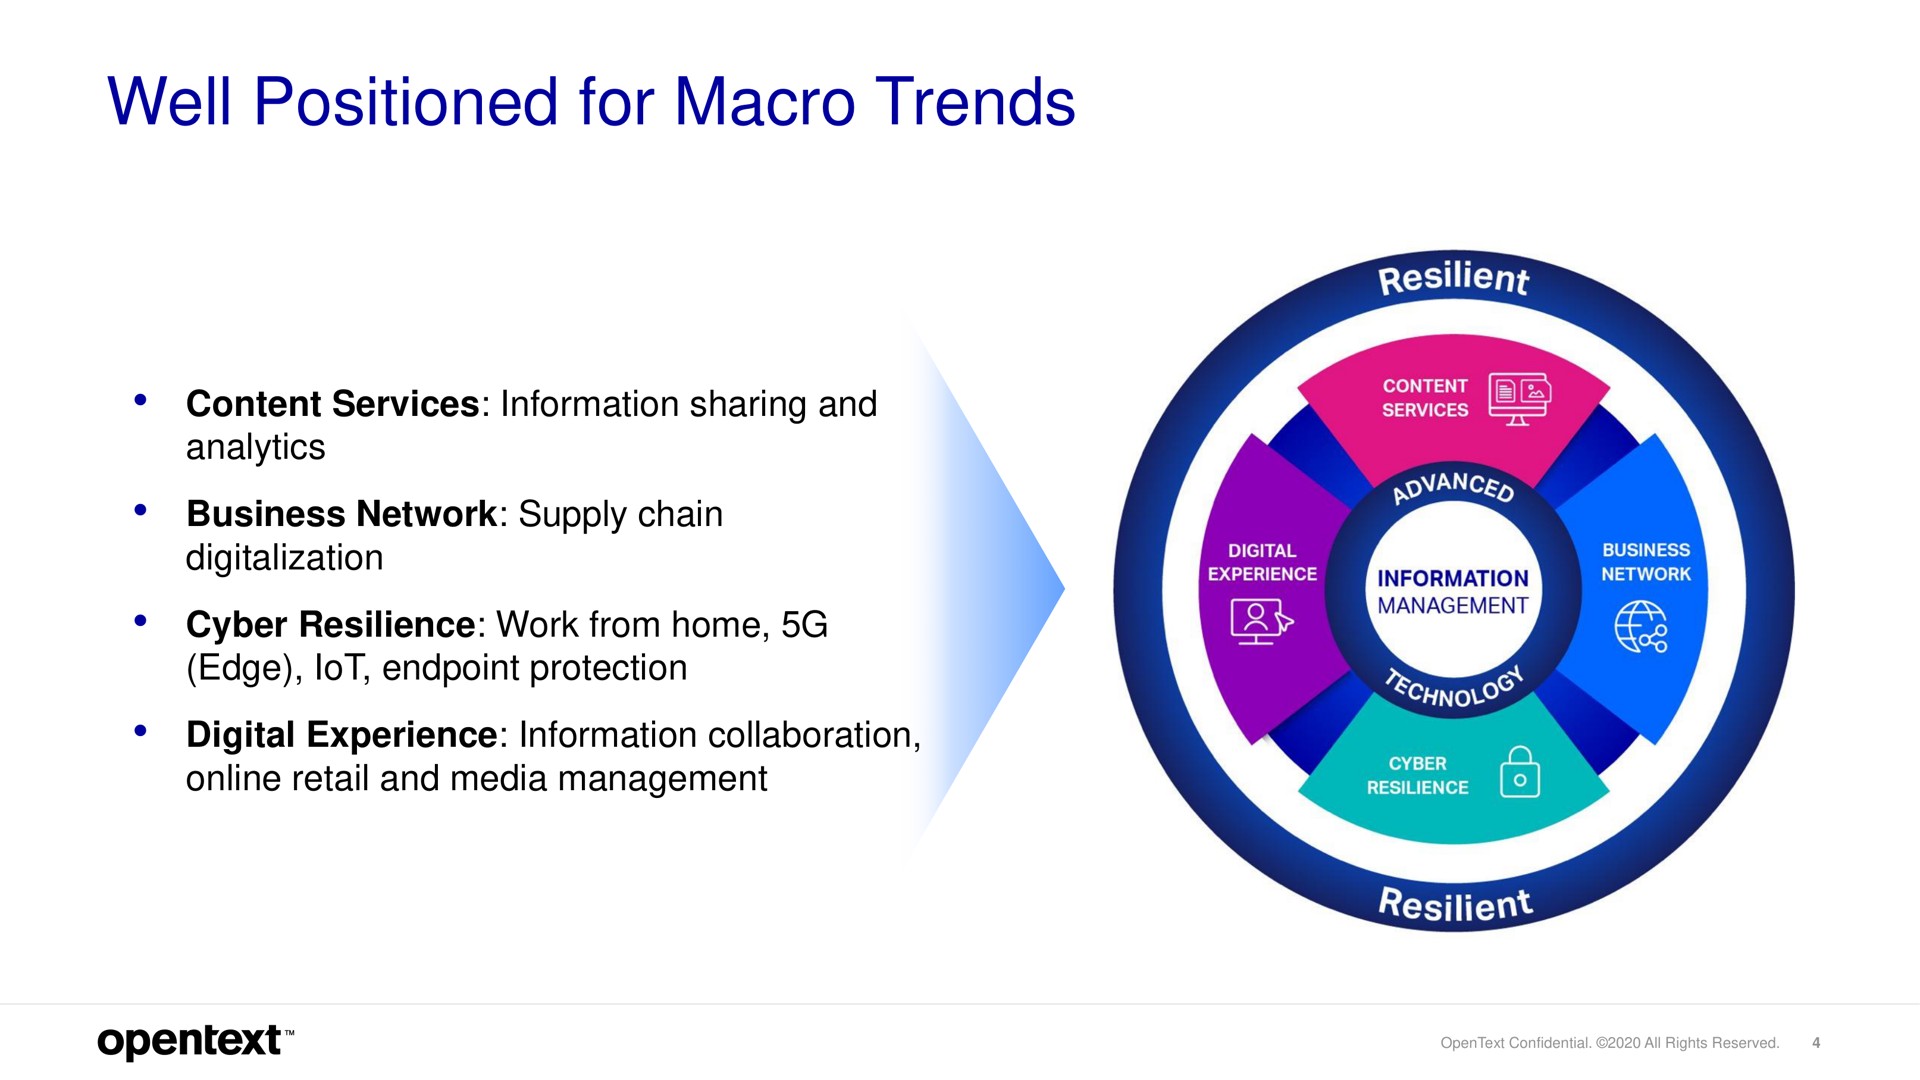 well positioned for macro trends | OpenText